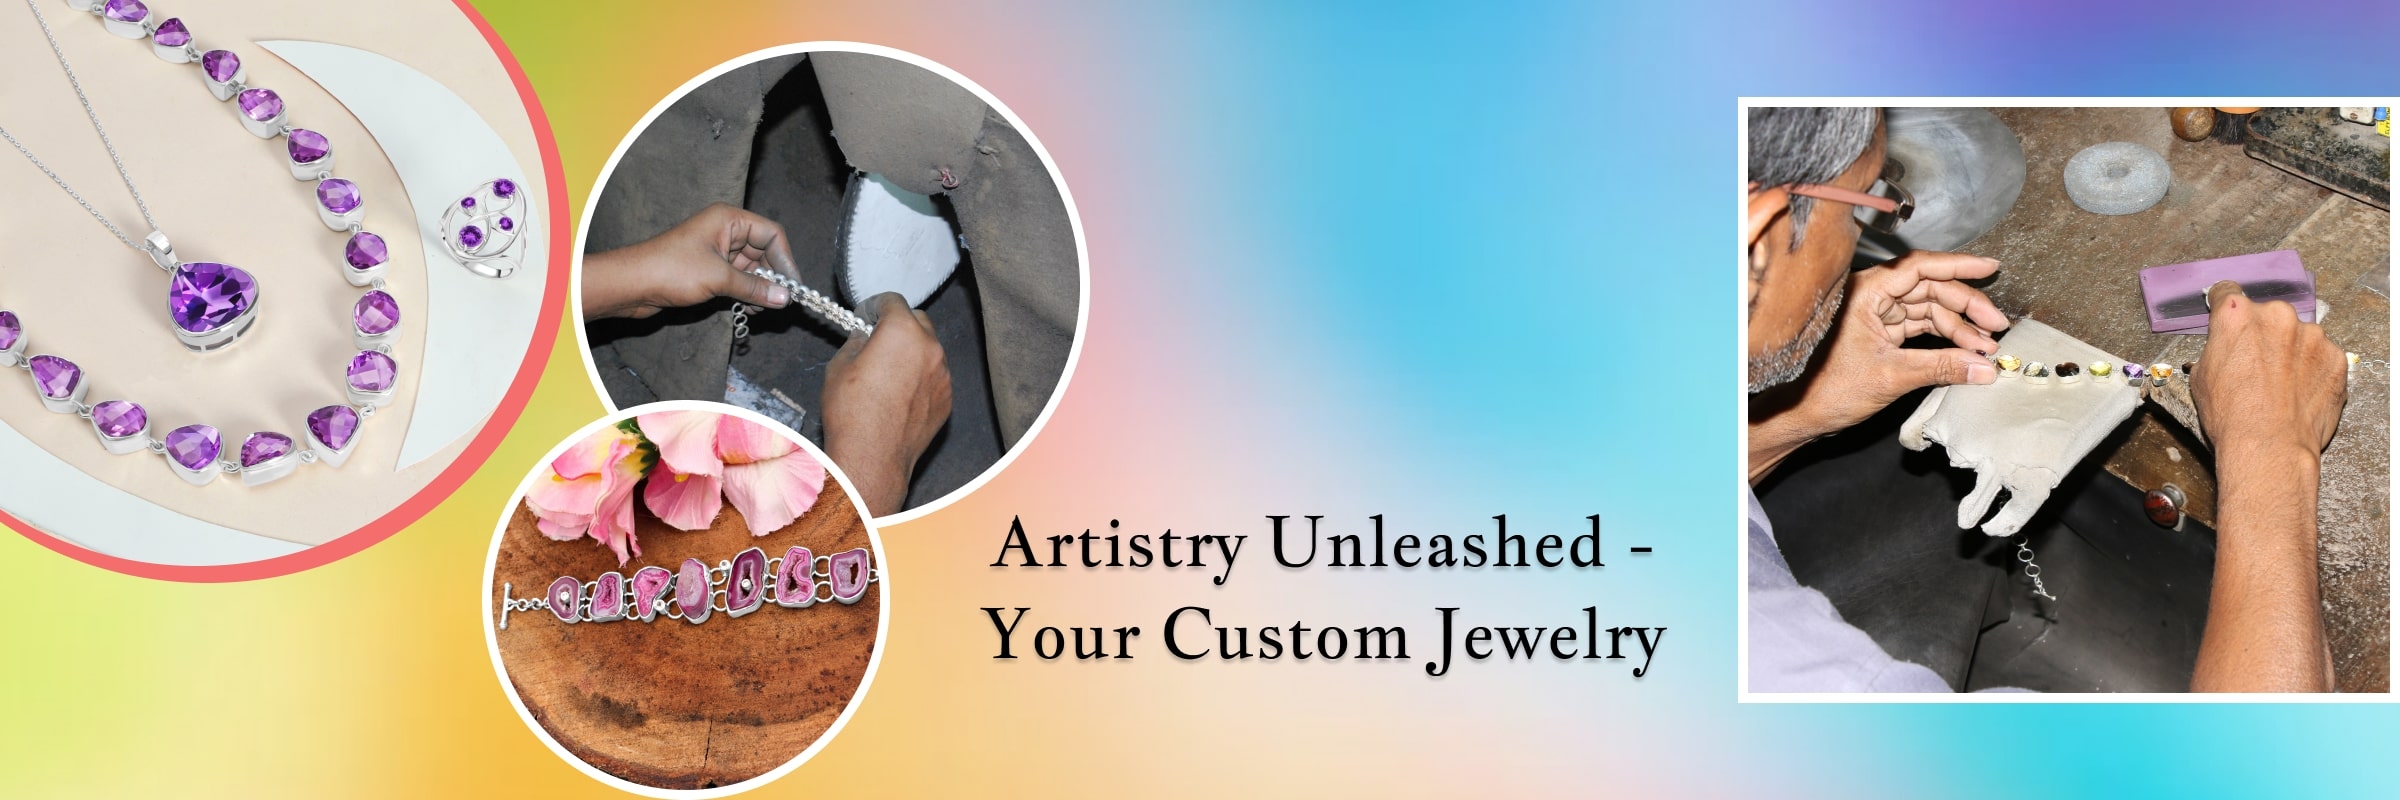 Buying Customized Jewelry? Did You Know This?